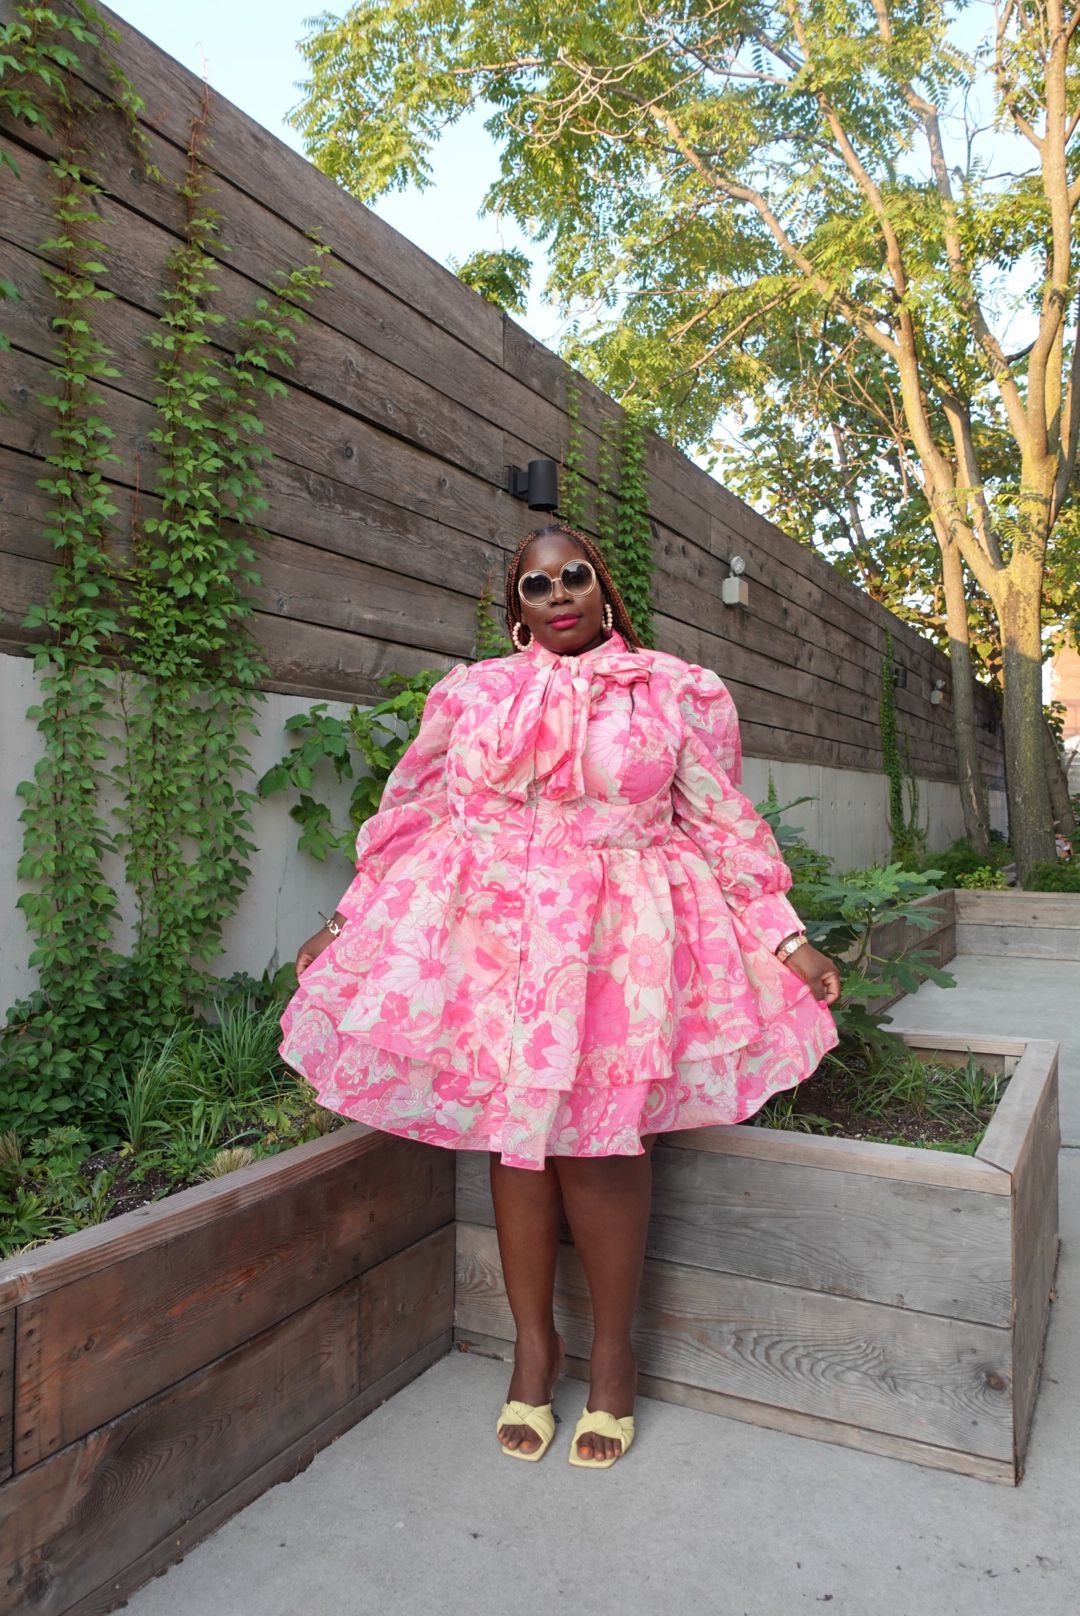 pink floral plus size shirtdress with a tie neck detail from ASOS paired with chloe sunglasses.